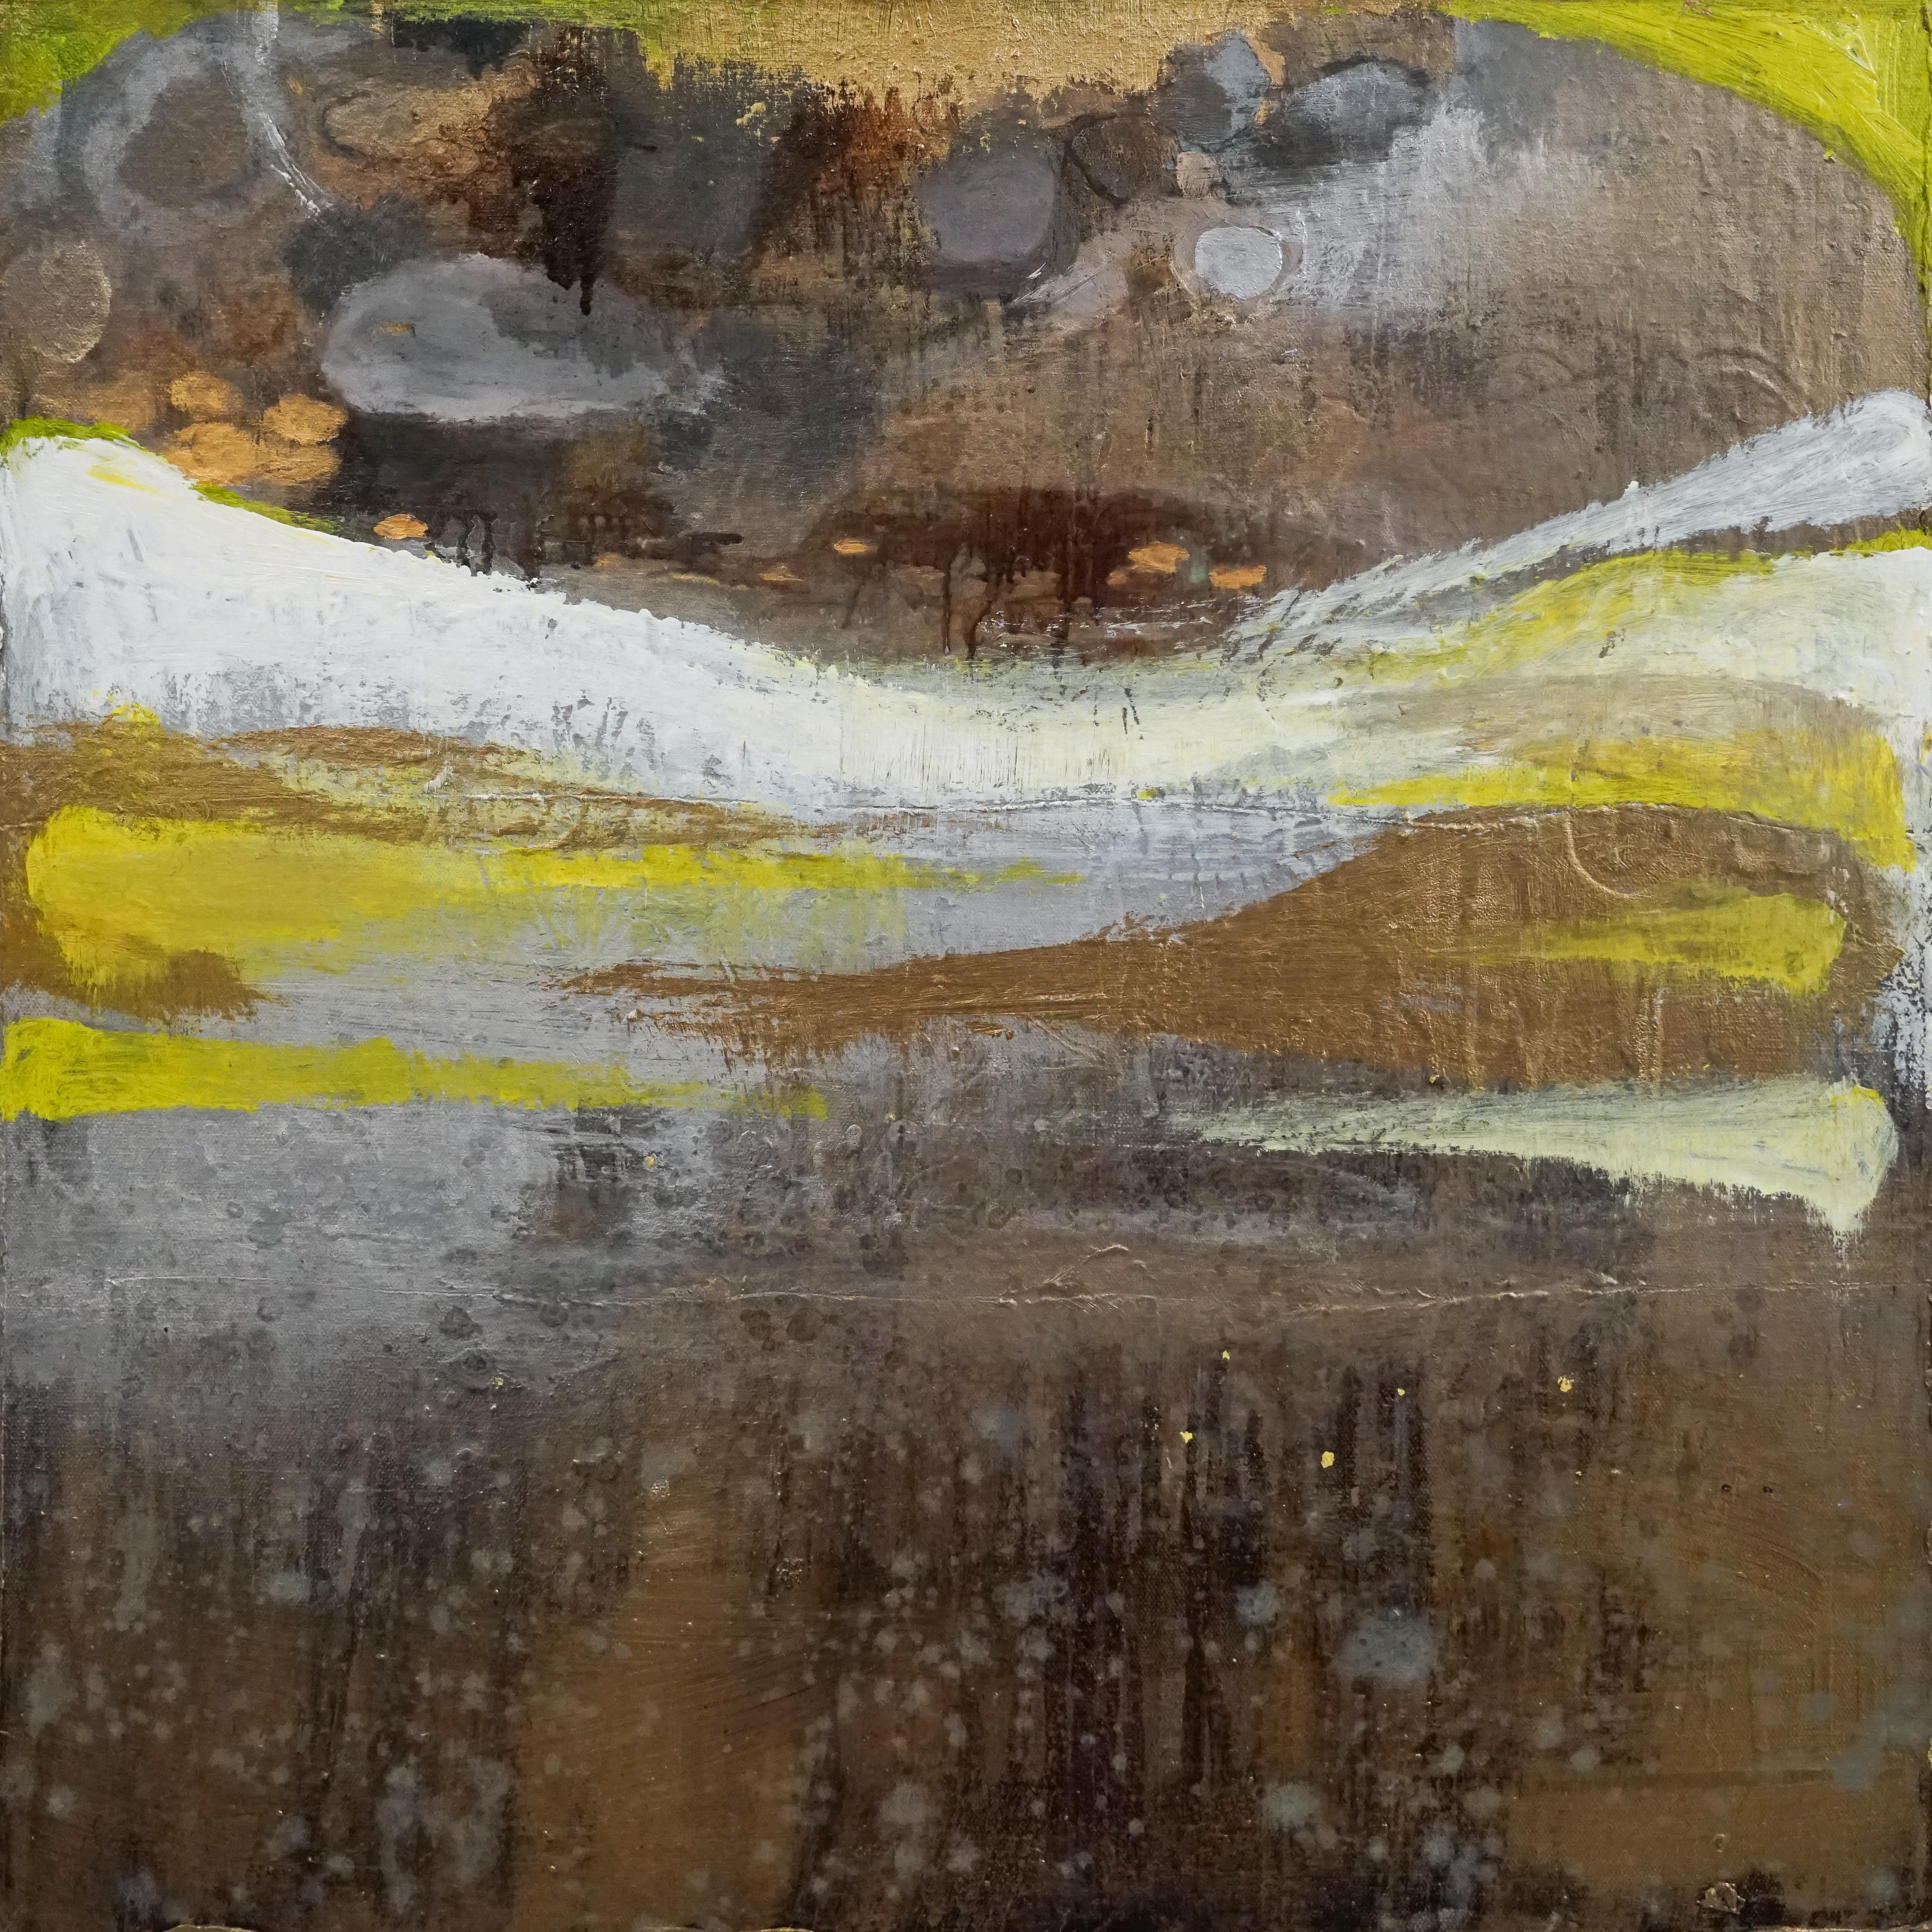 "Wisteria and Citron" by Sarah Raskey is a 24 x 24 inch mixed media abstract painting on canvas. 
Bands of crisp white, warm ivory and vivid yellow flow across a peaceful bronze and amber landscape evoke feelings of tranquility. 

Sarah Raskey is a